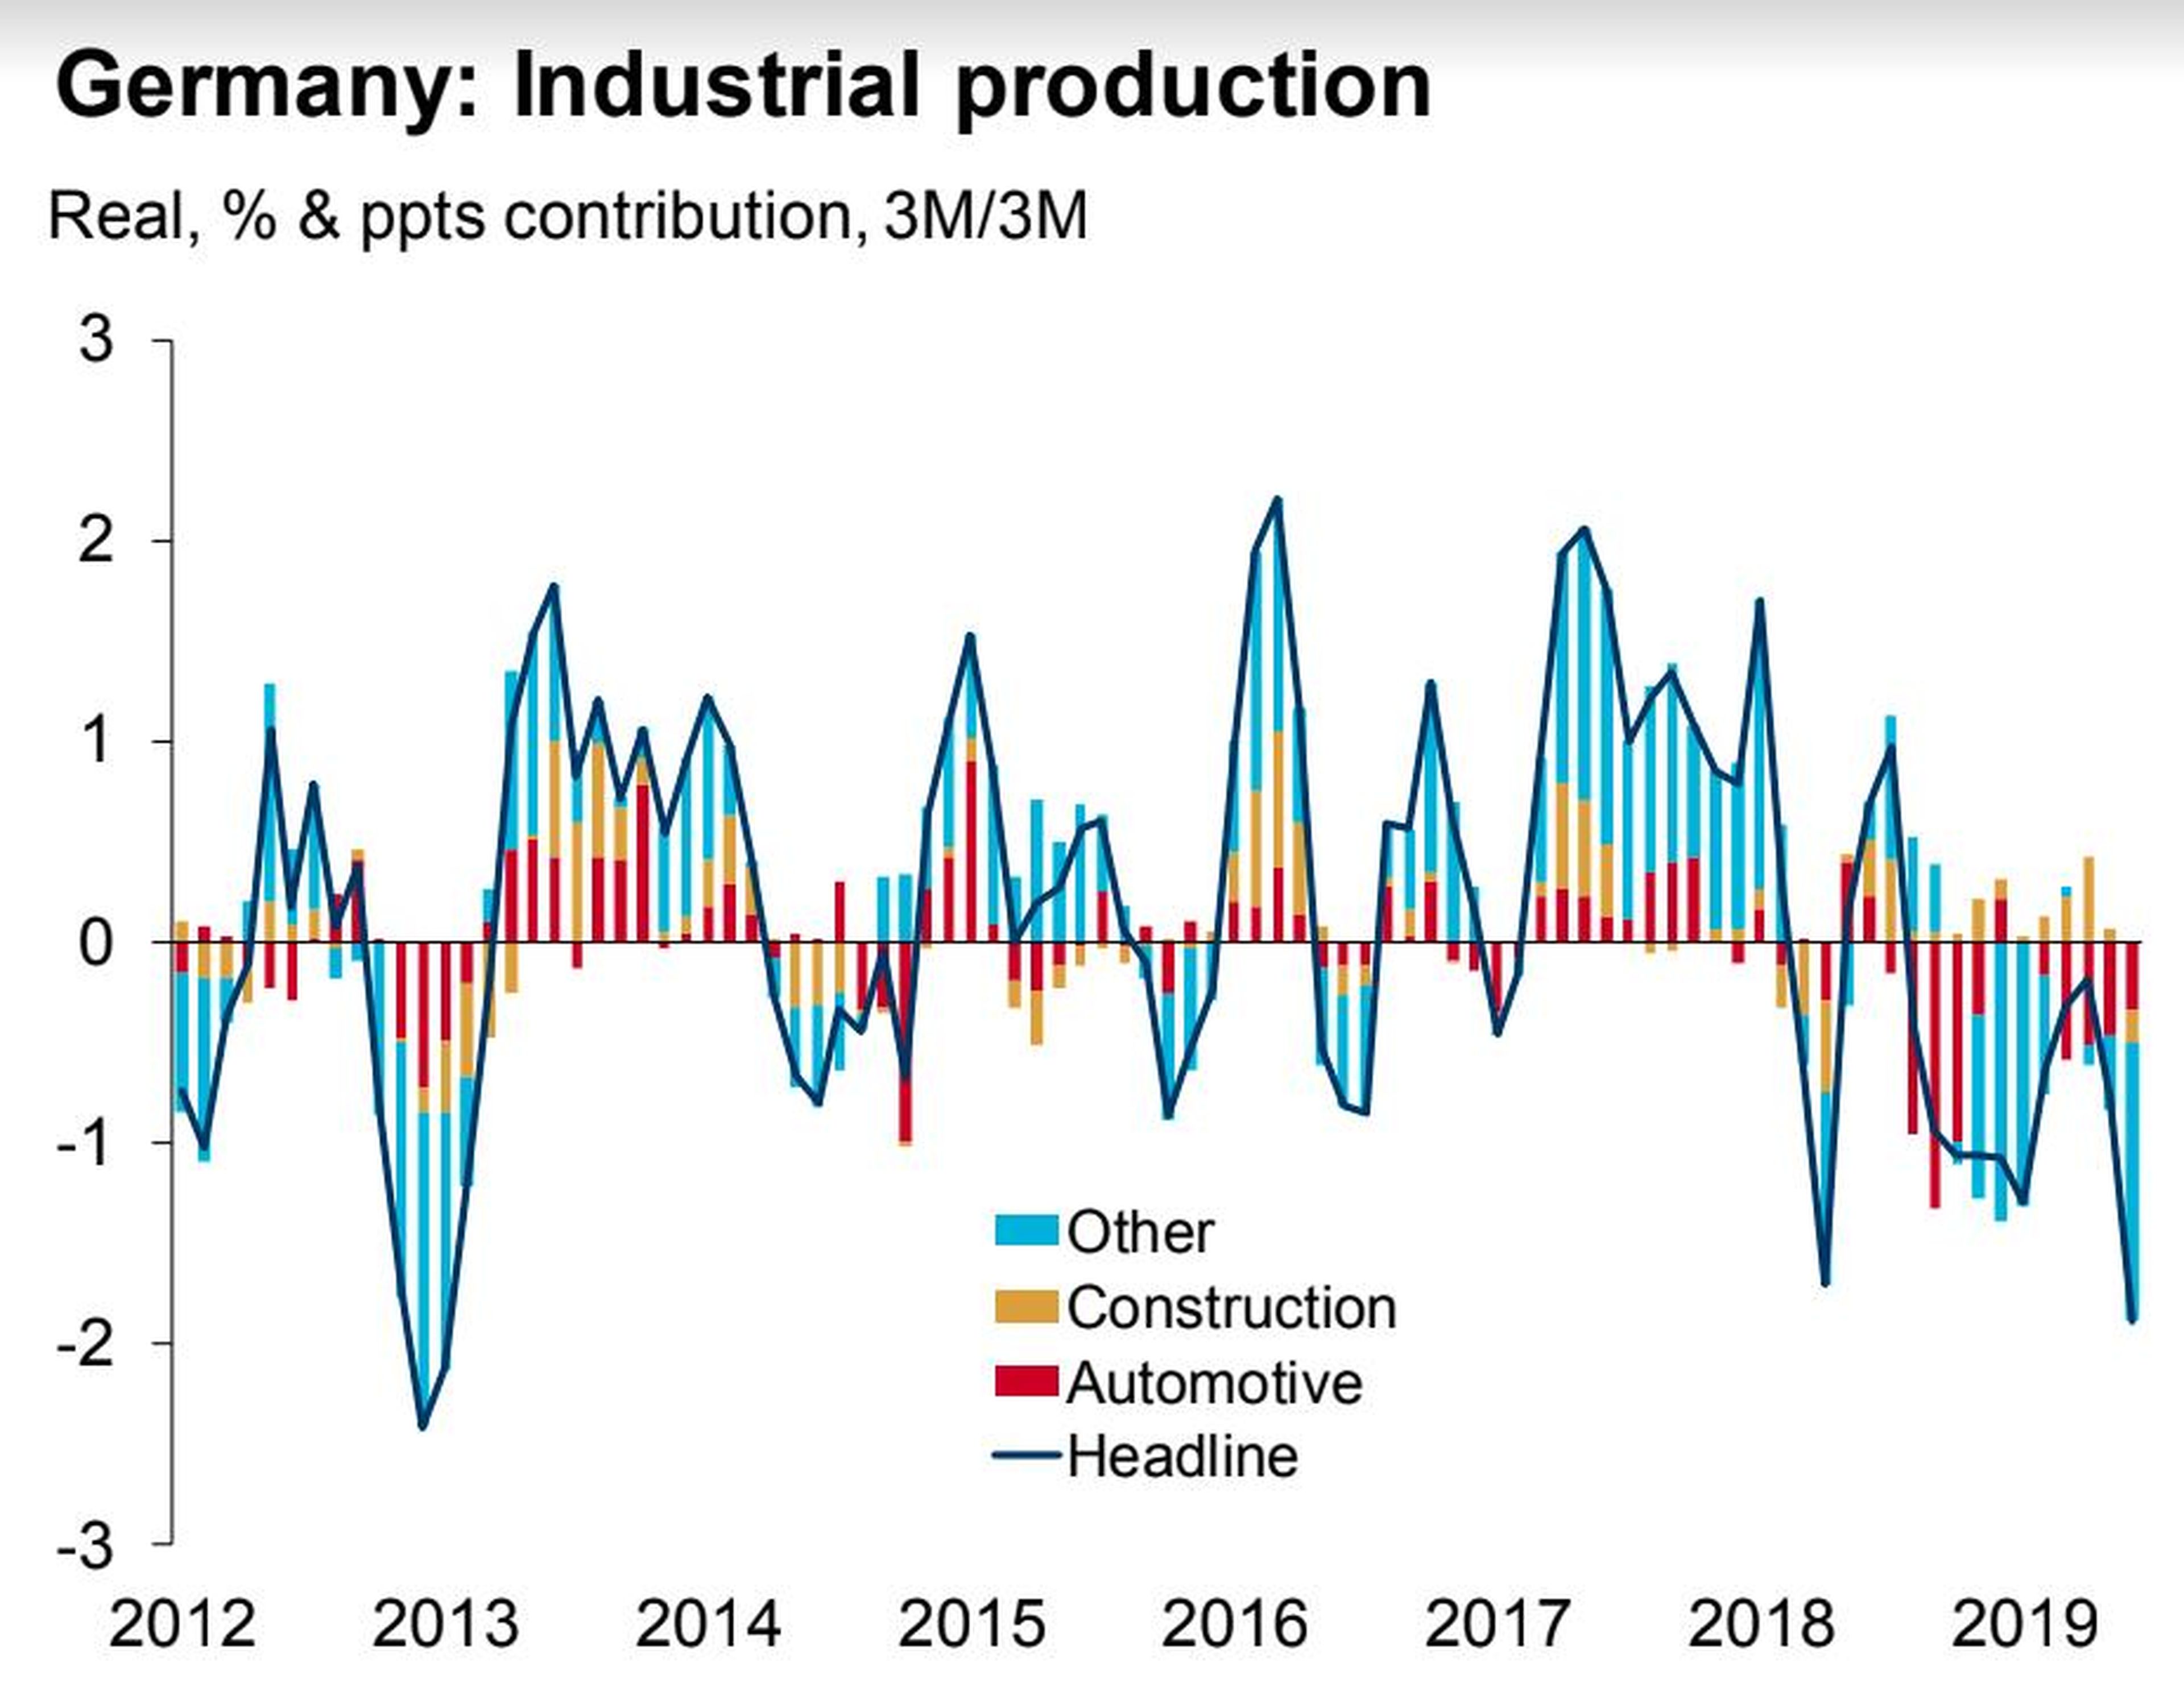 Germany industry continues to decline.